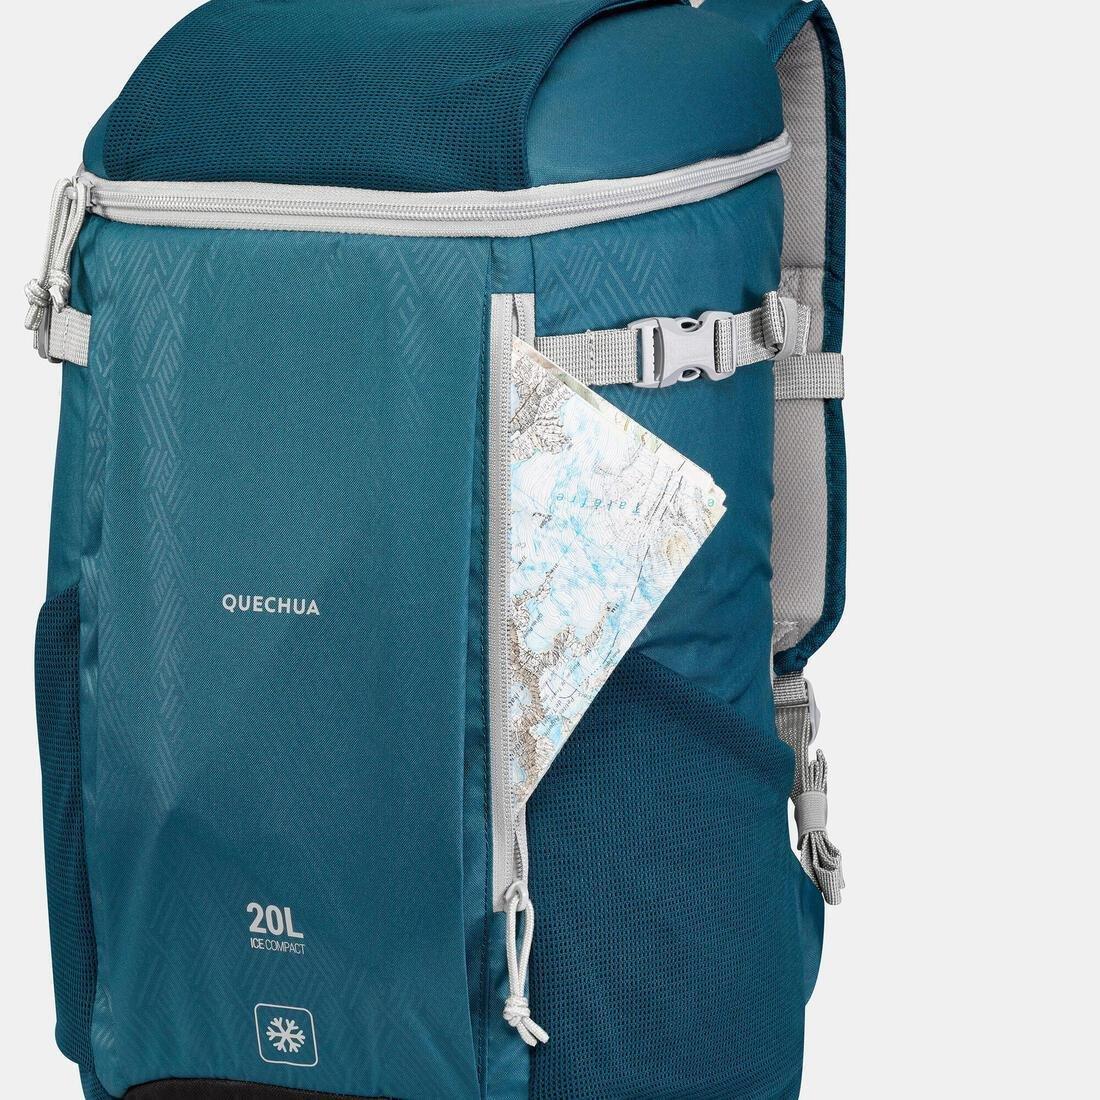 QUECHUA - Isothermal Backpack 20 L - Nh100 Ice Compact, Blue